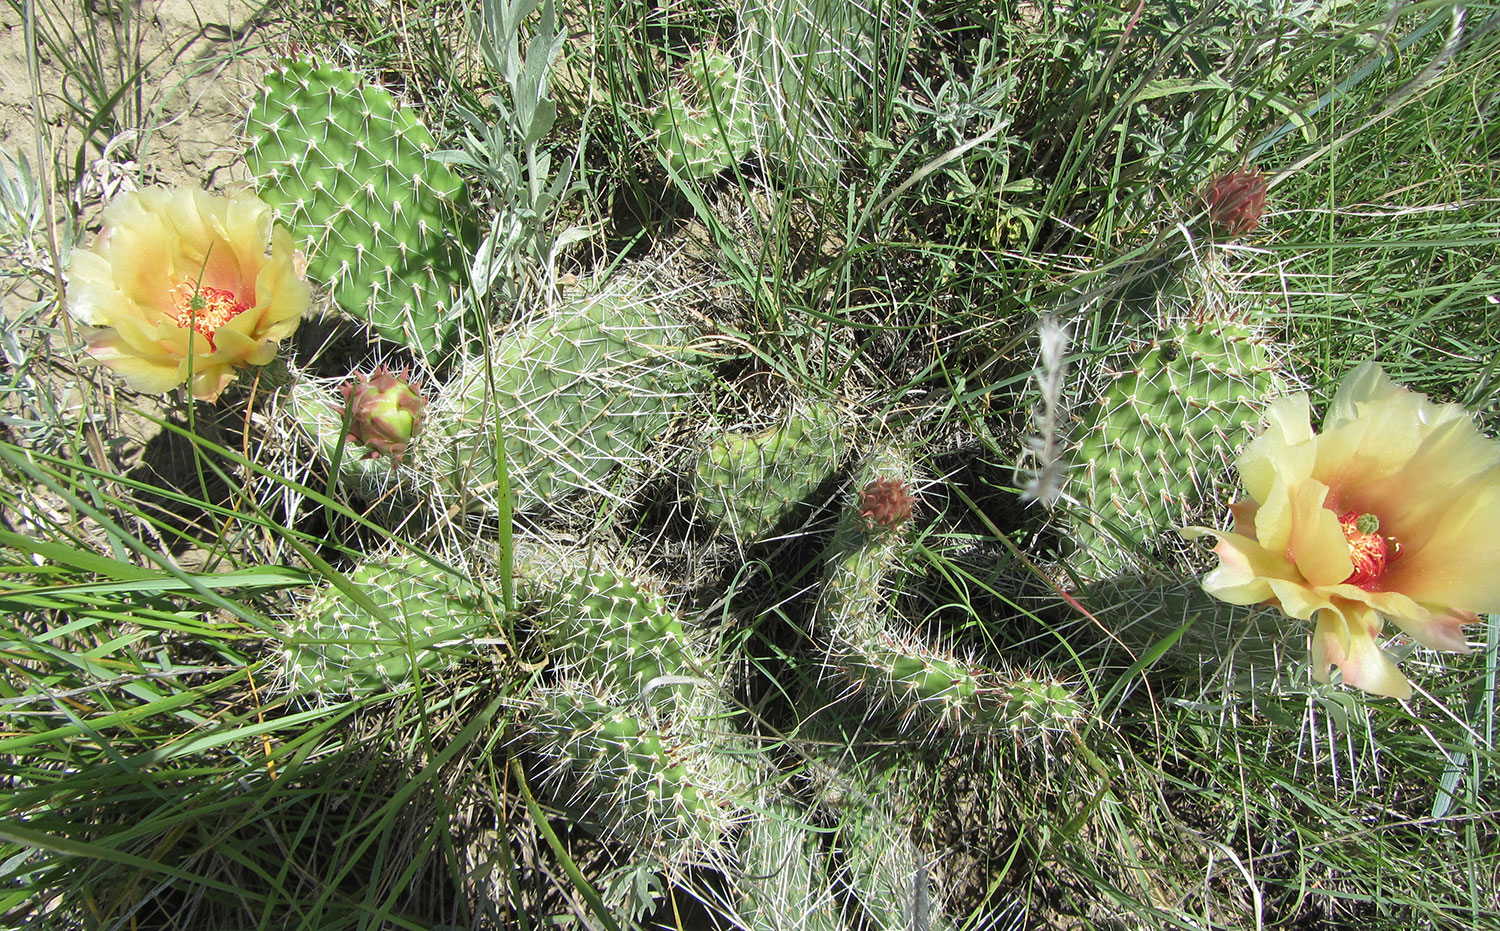 Prickly pear cactus in bloom